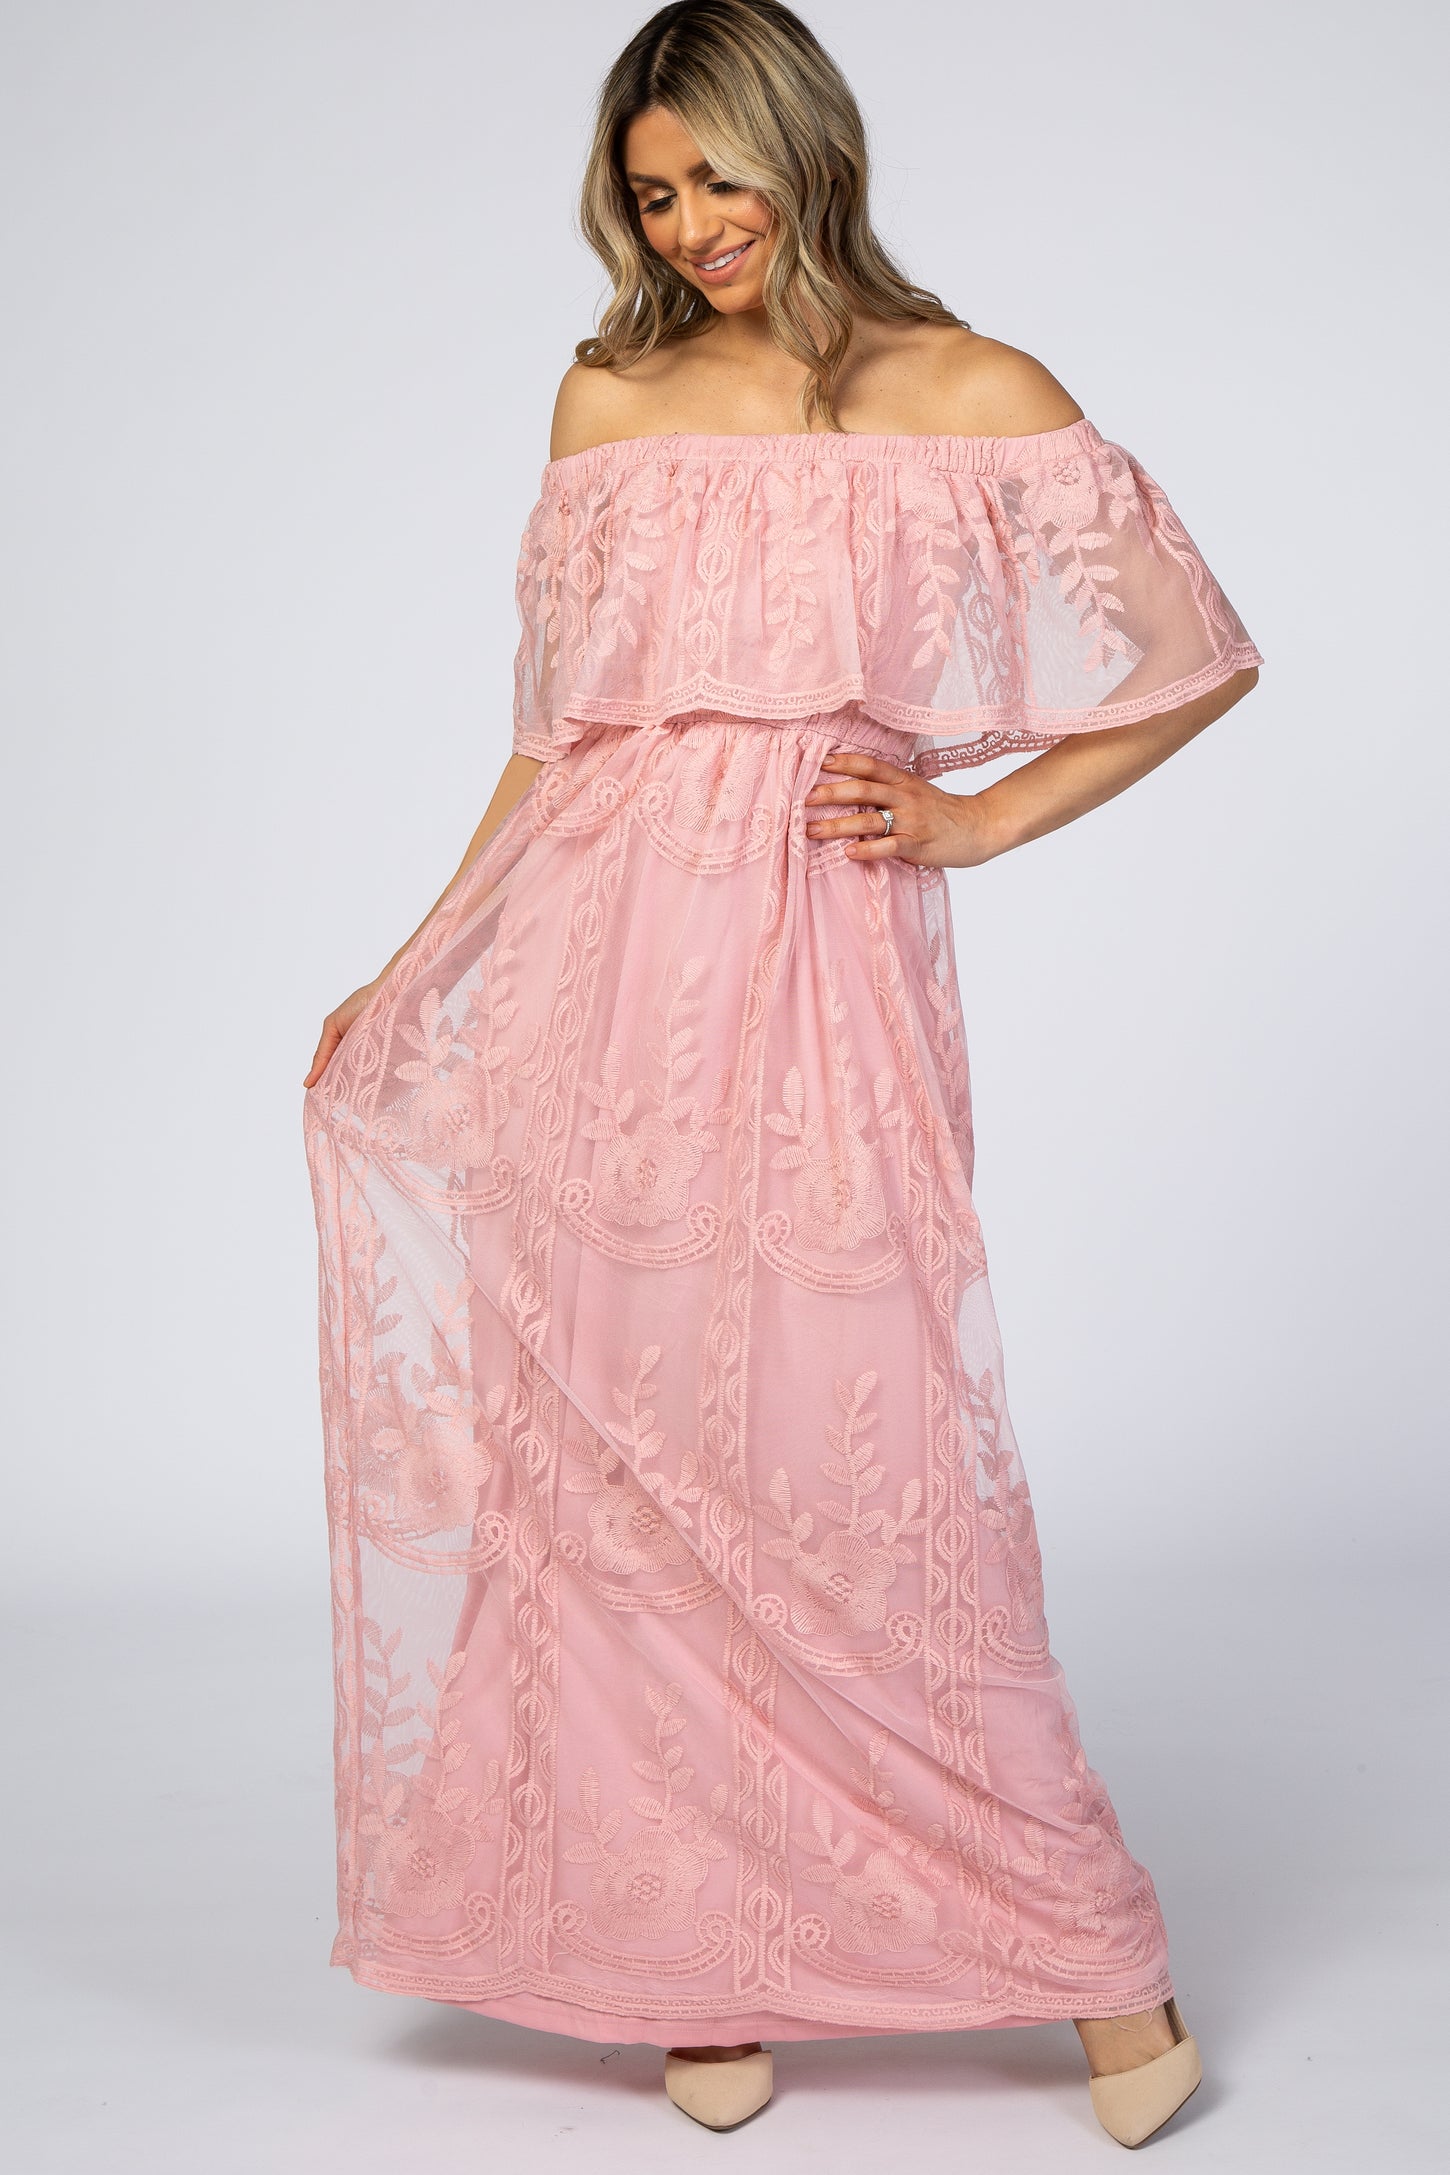 Pink Lace Overlay Off Shoulder Flounce Maternity Maxi Dress